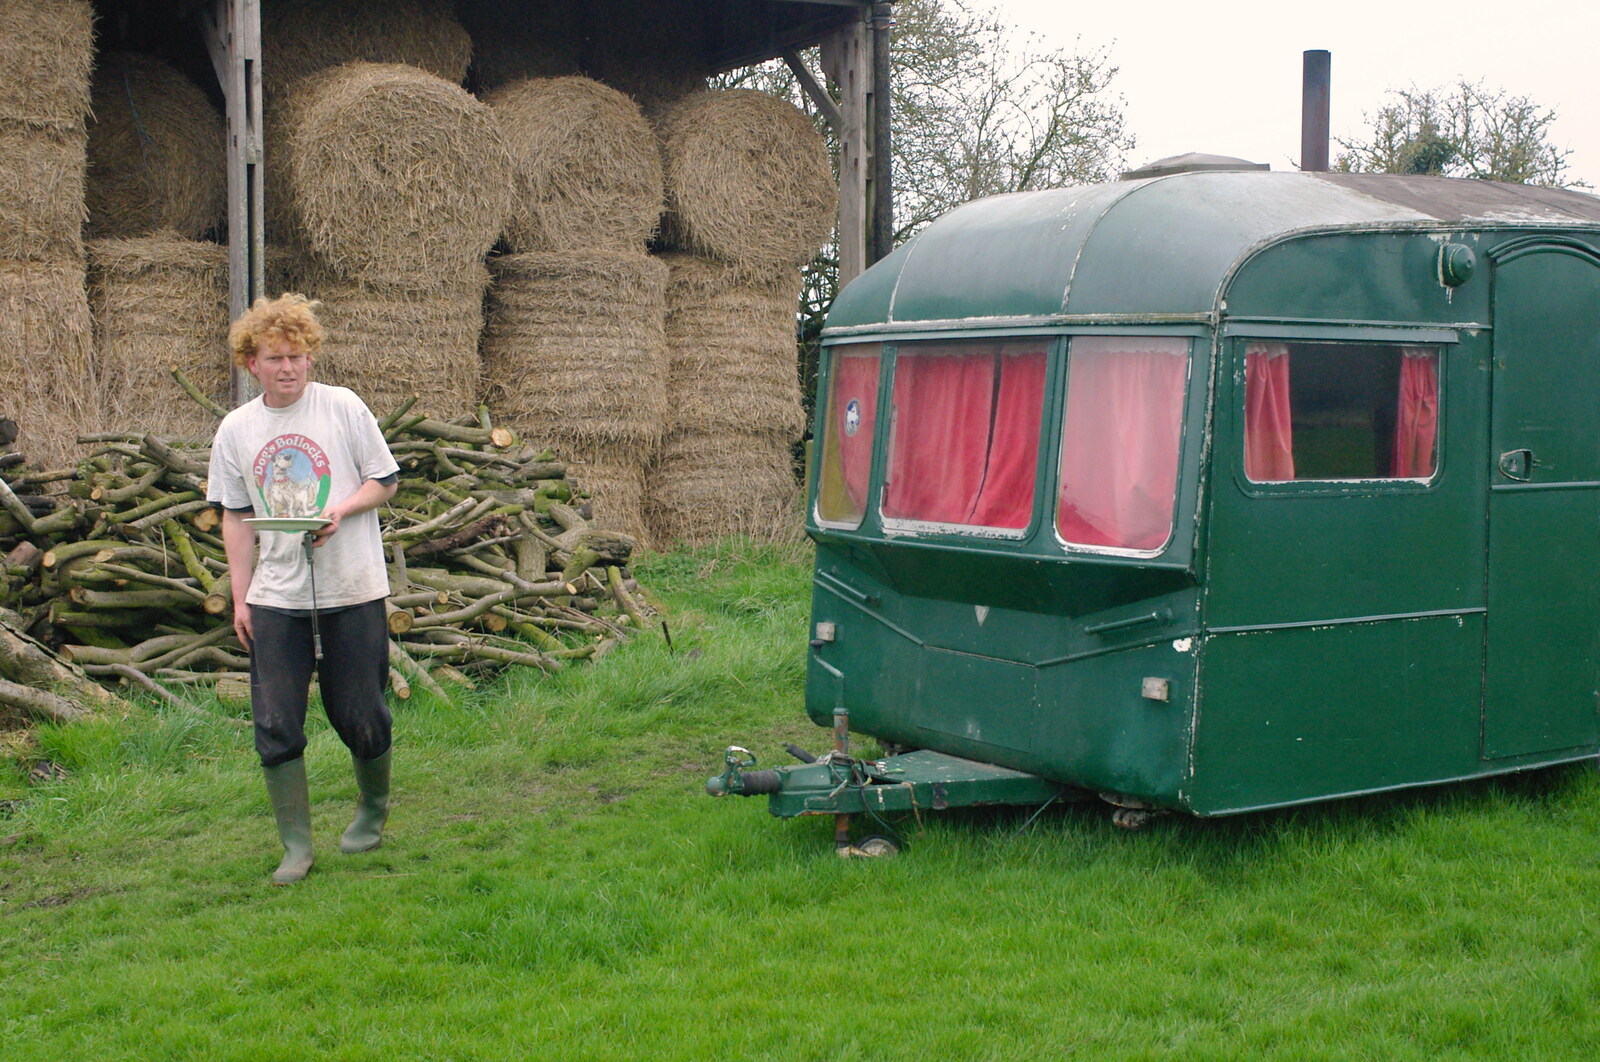 Wavy and his caravan home from Wavy and the Milking Room, Dairy Farm, Thrandeston, Suffolk - 28th March 2005